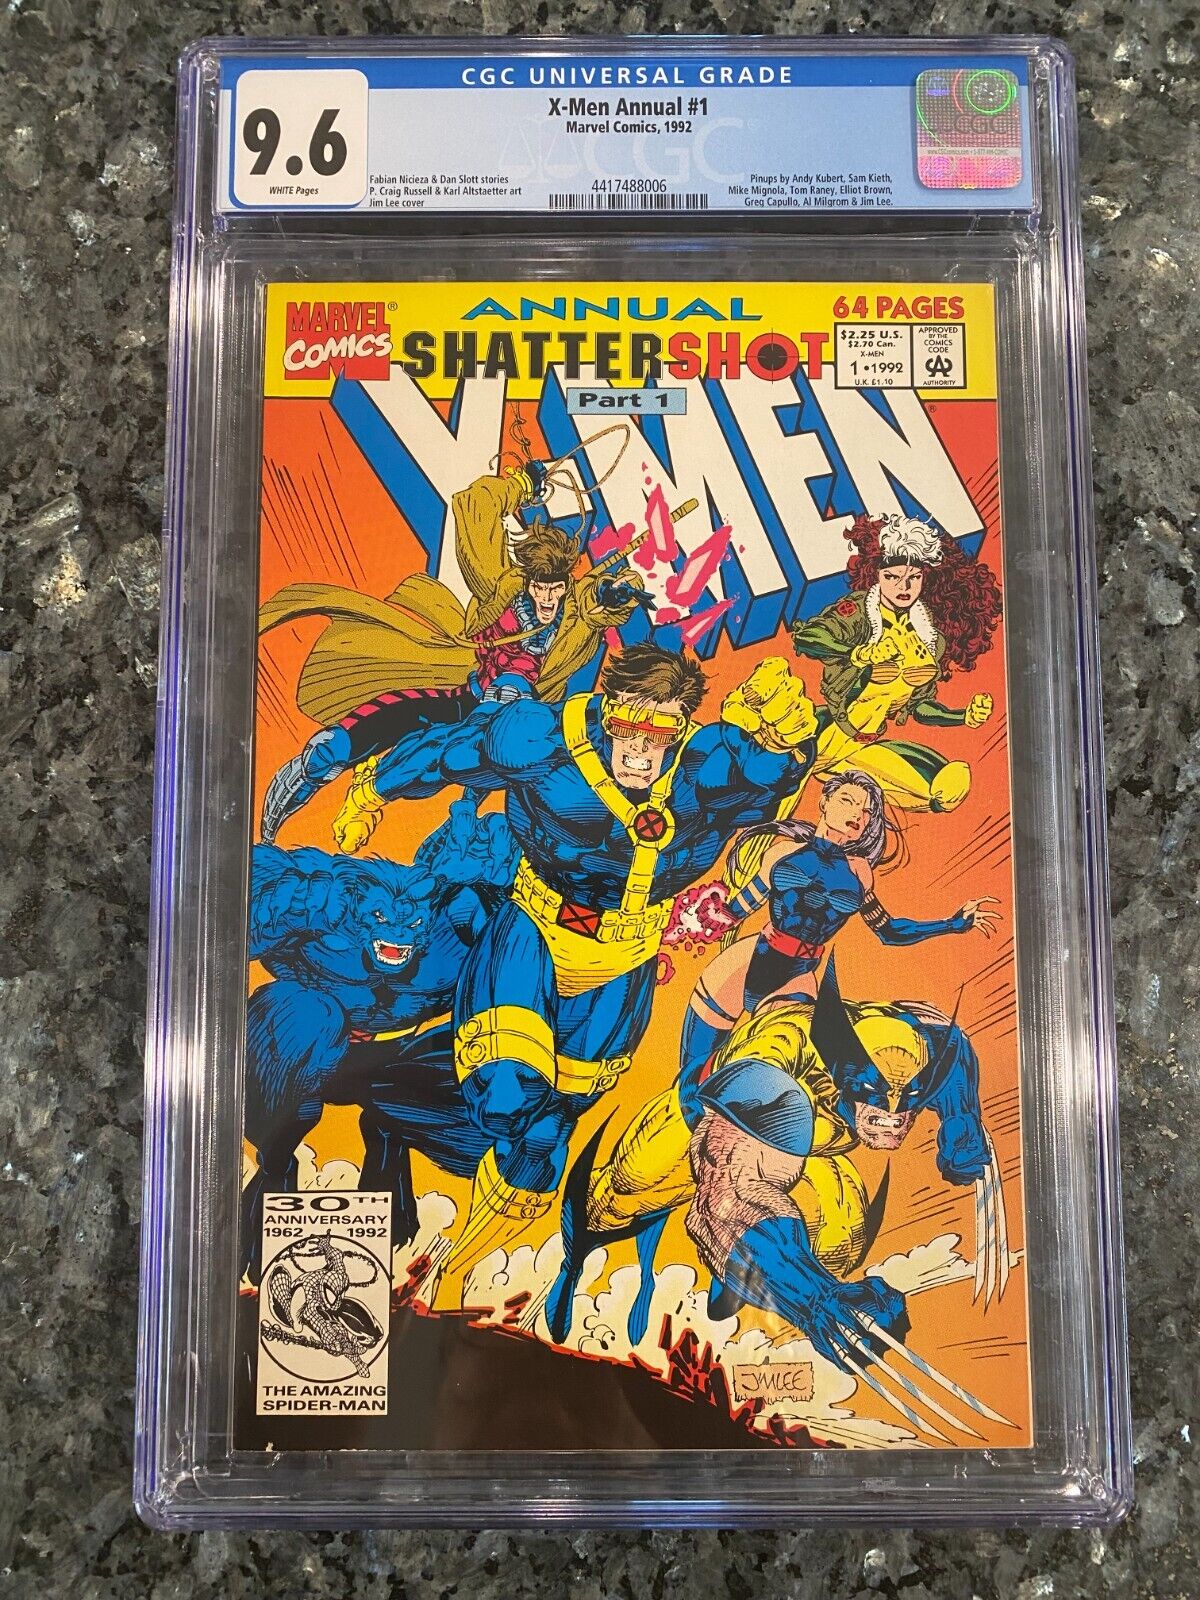 Extraordinary Marvel Extravaganza: X-Men Annual #1 - CGC 9.6 White Pages